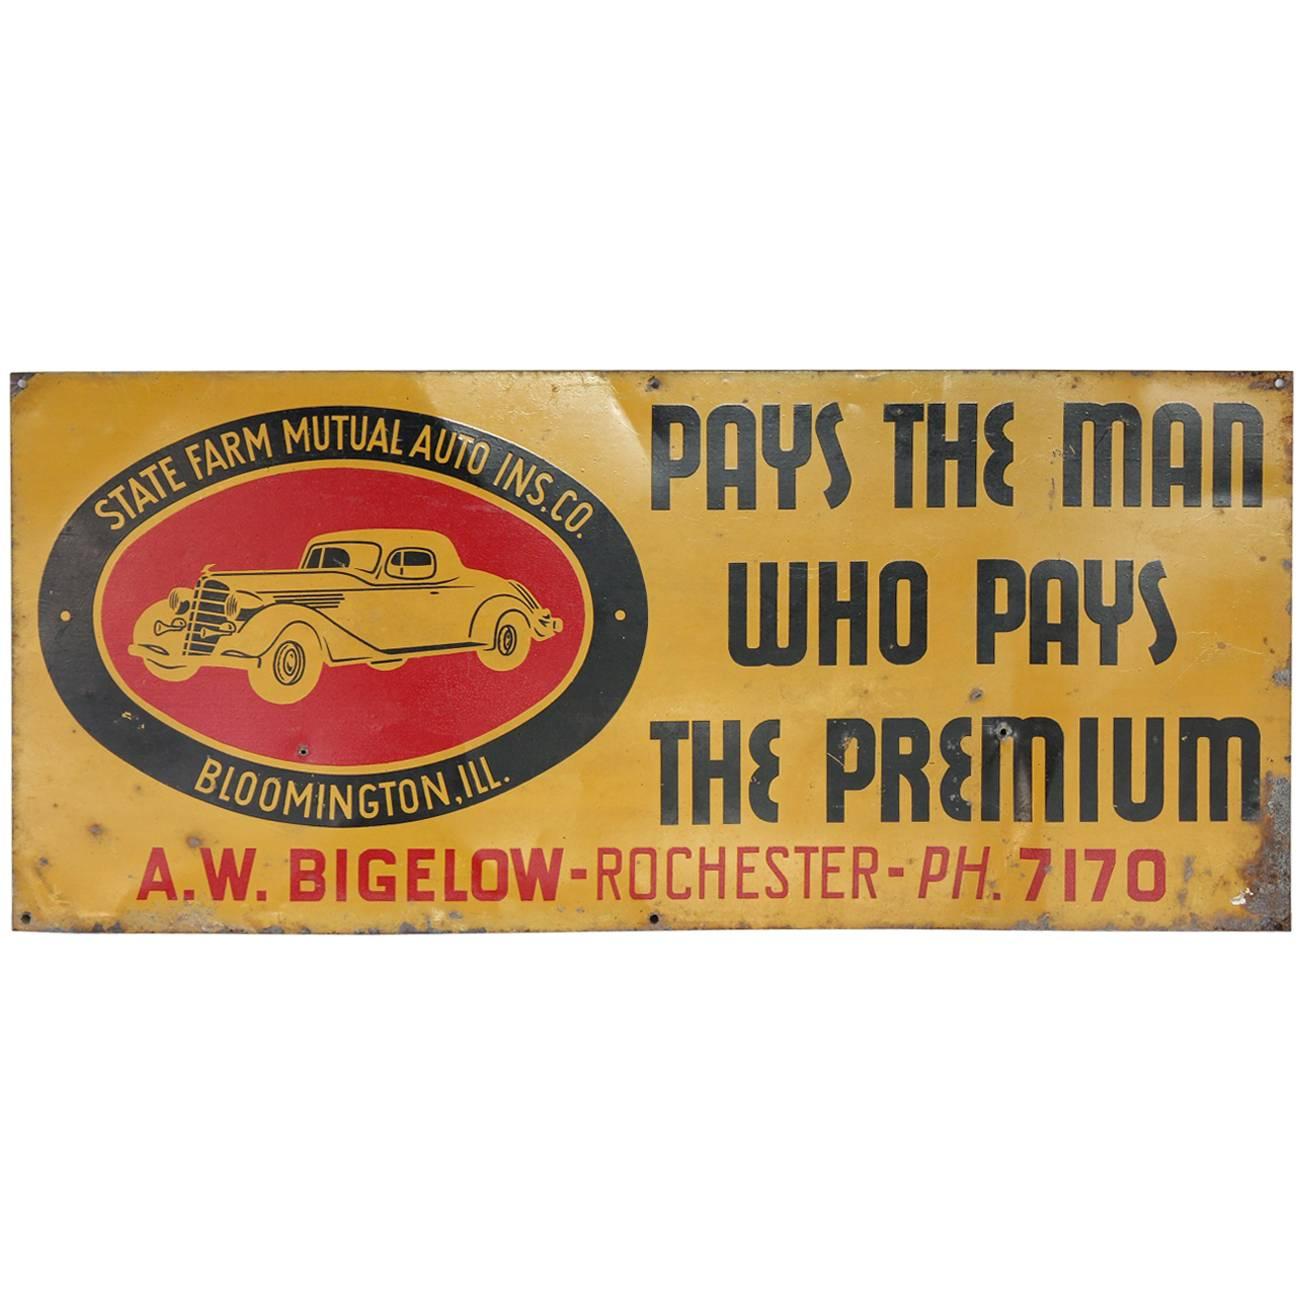 1930s Auto Insurance Advertising Tin Sign "Pays The Man Who Pays The Premium"